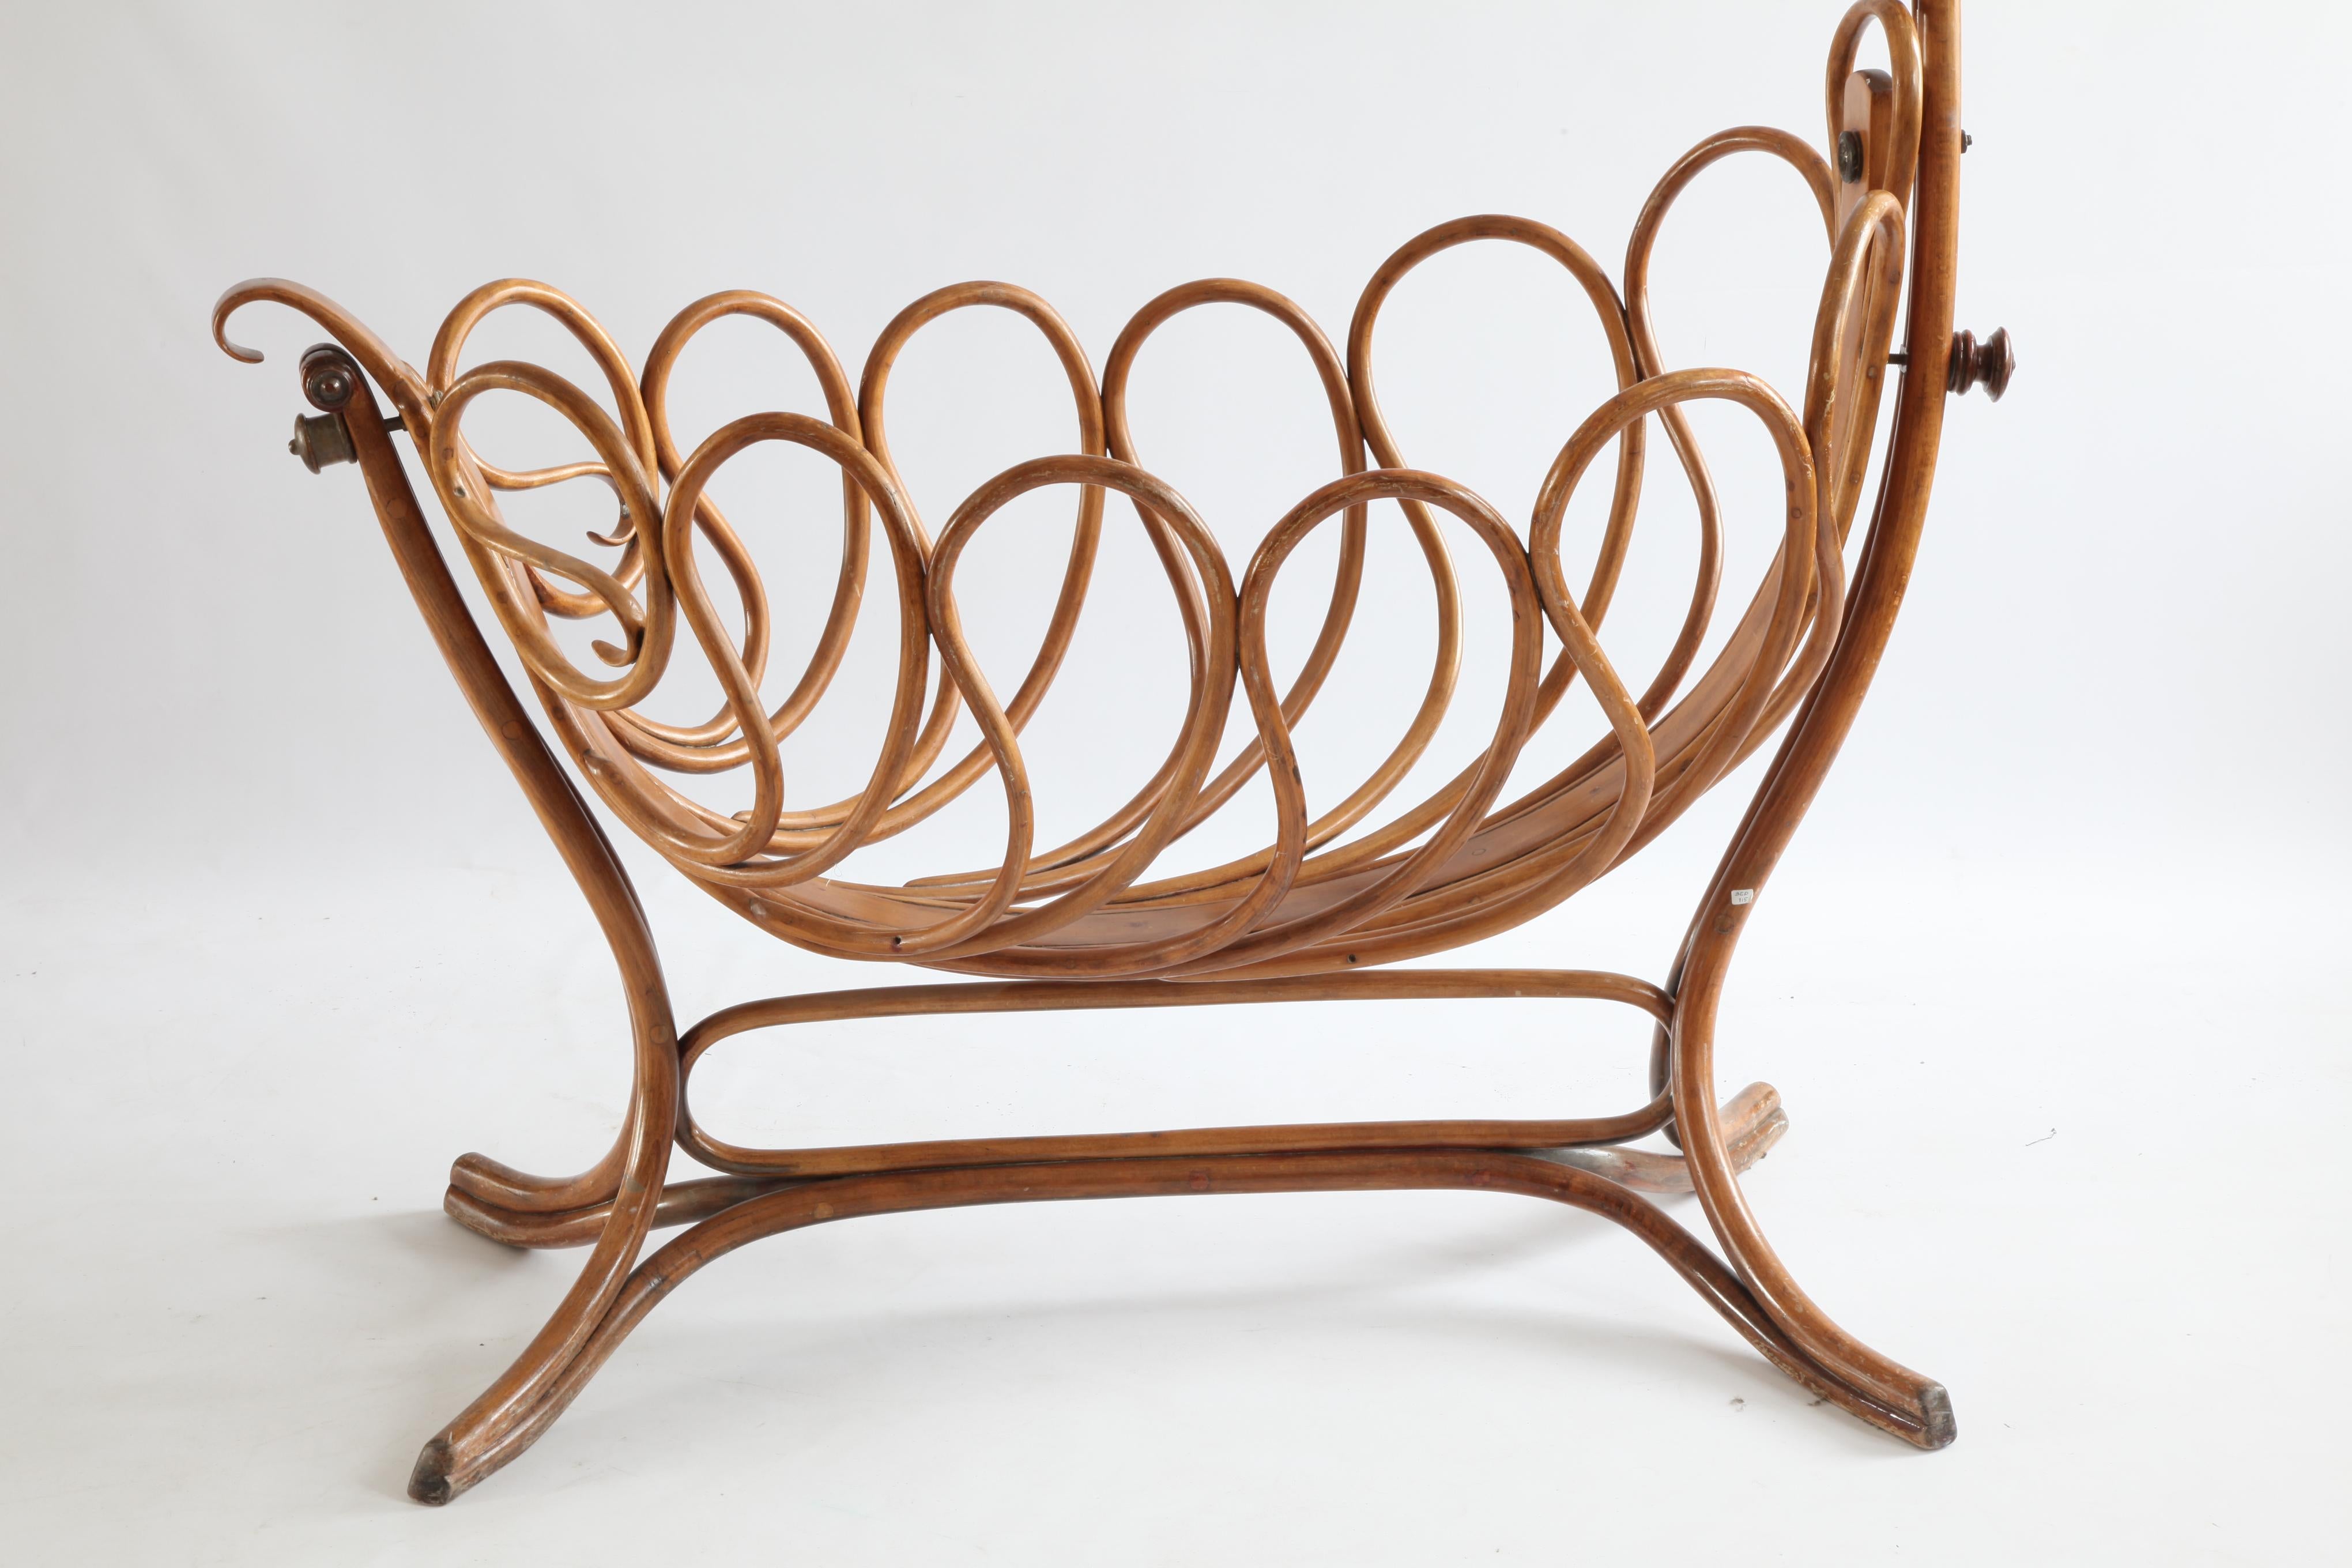 Rare French Bentwood Cradle in the Thonet Style, Late 19th Century For Sale 2